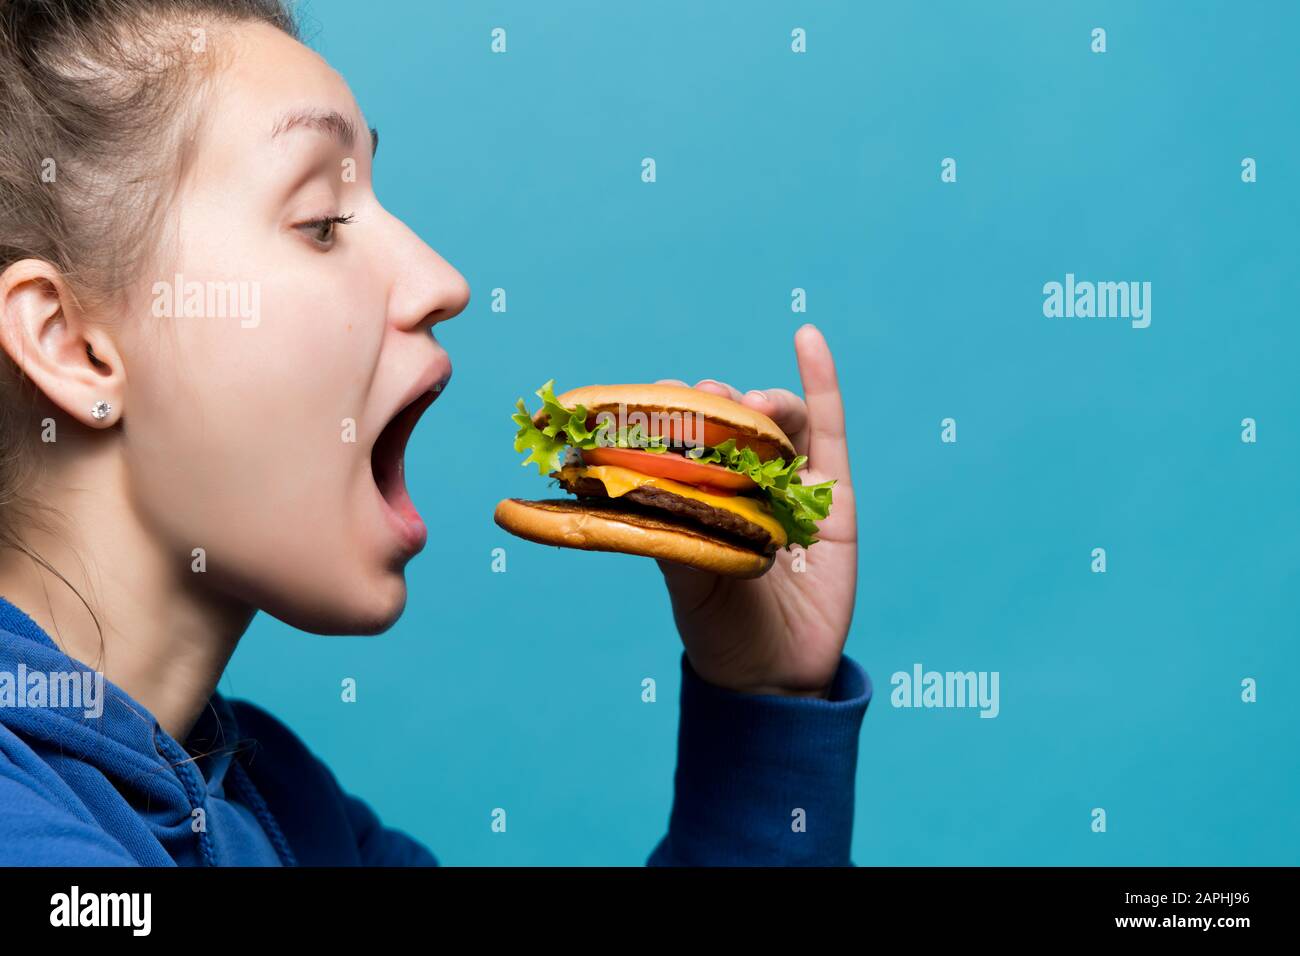 The girl opened her mouth wide and is going to eat a burger, side view Stock Photo